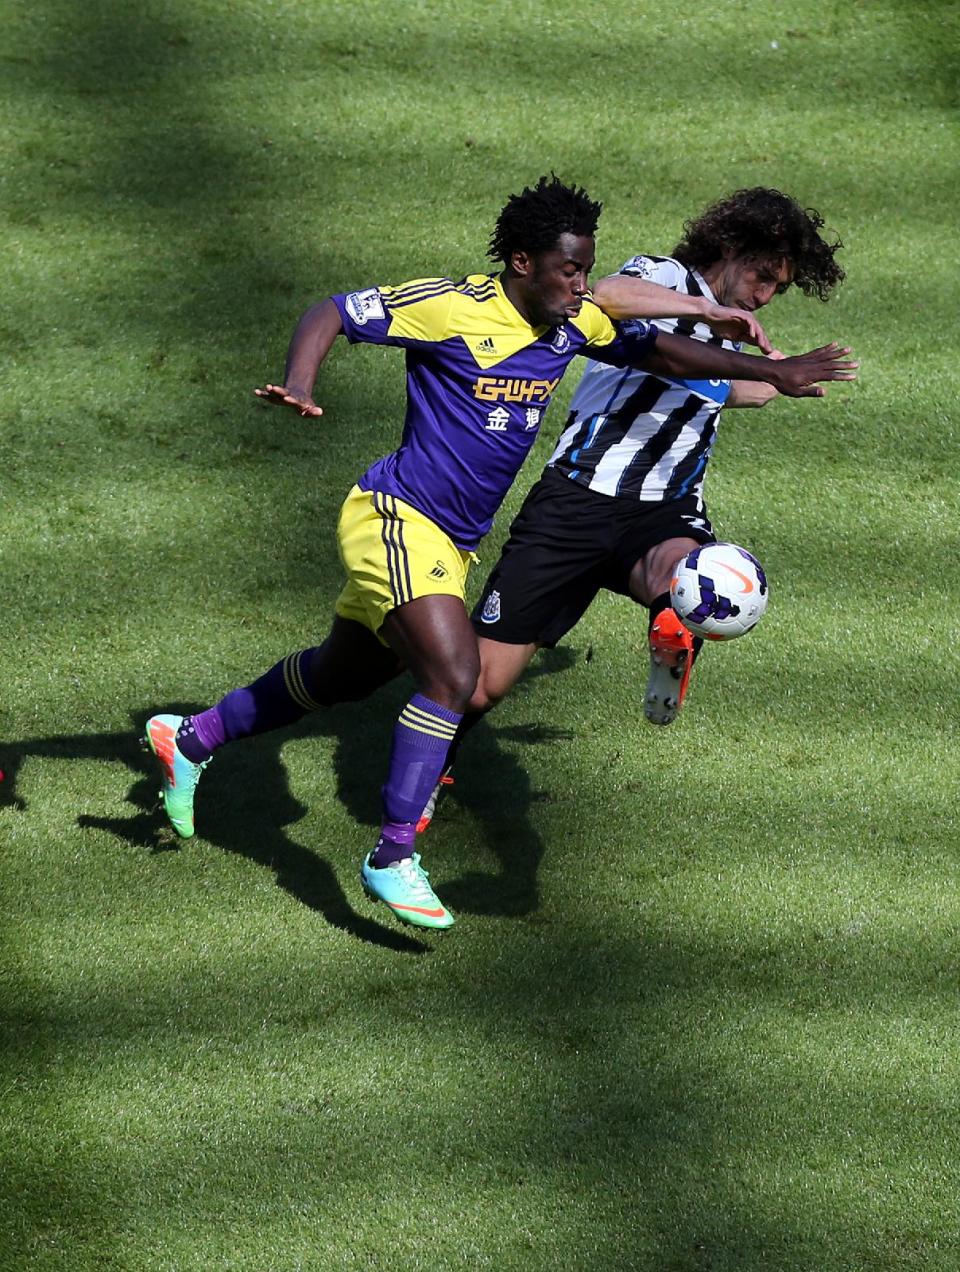 Newcastle United's captain Fabricio Coloccini, right, vies for the ball with Swansea City's Wilfried Bony, left, during their English Premier League soccer match at St James' Park, Newcastle, England, Saturday, April 19, 2014. (AP Photo/Scott Heppell)